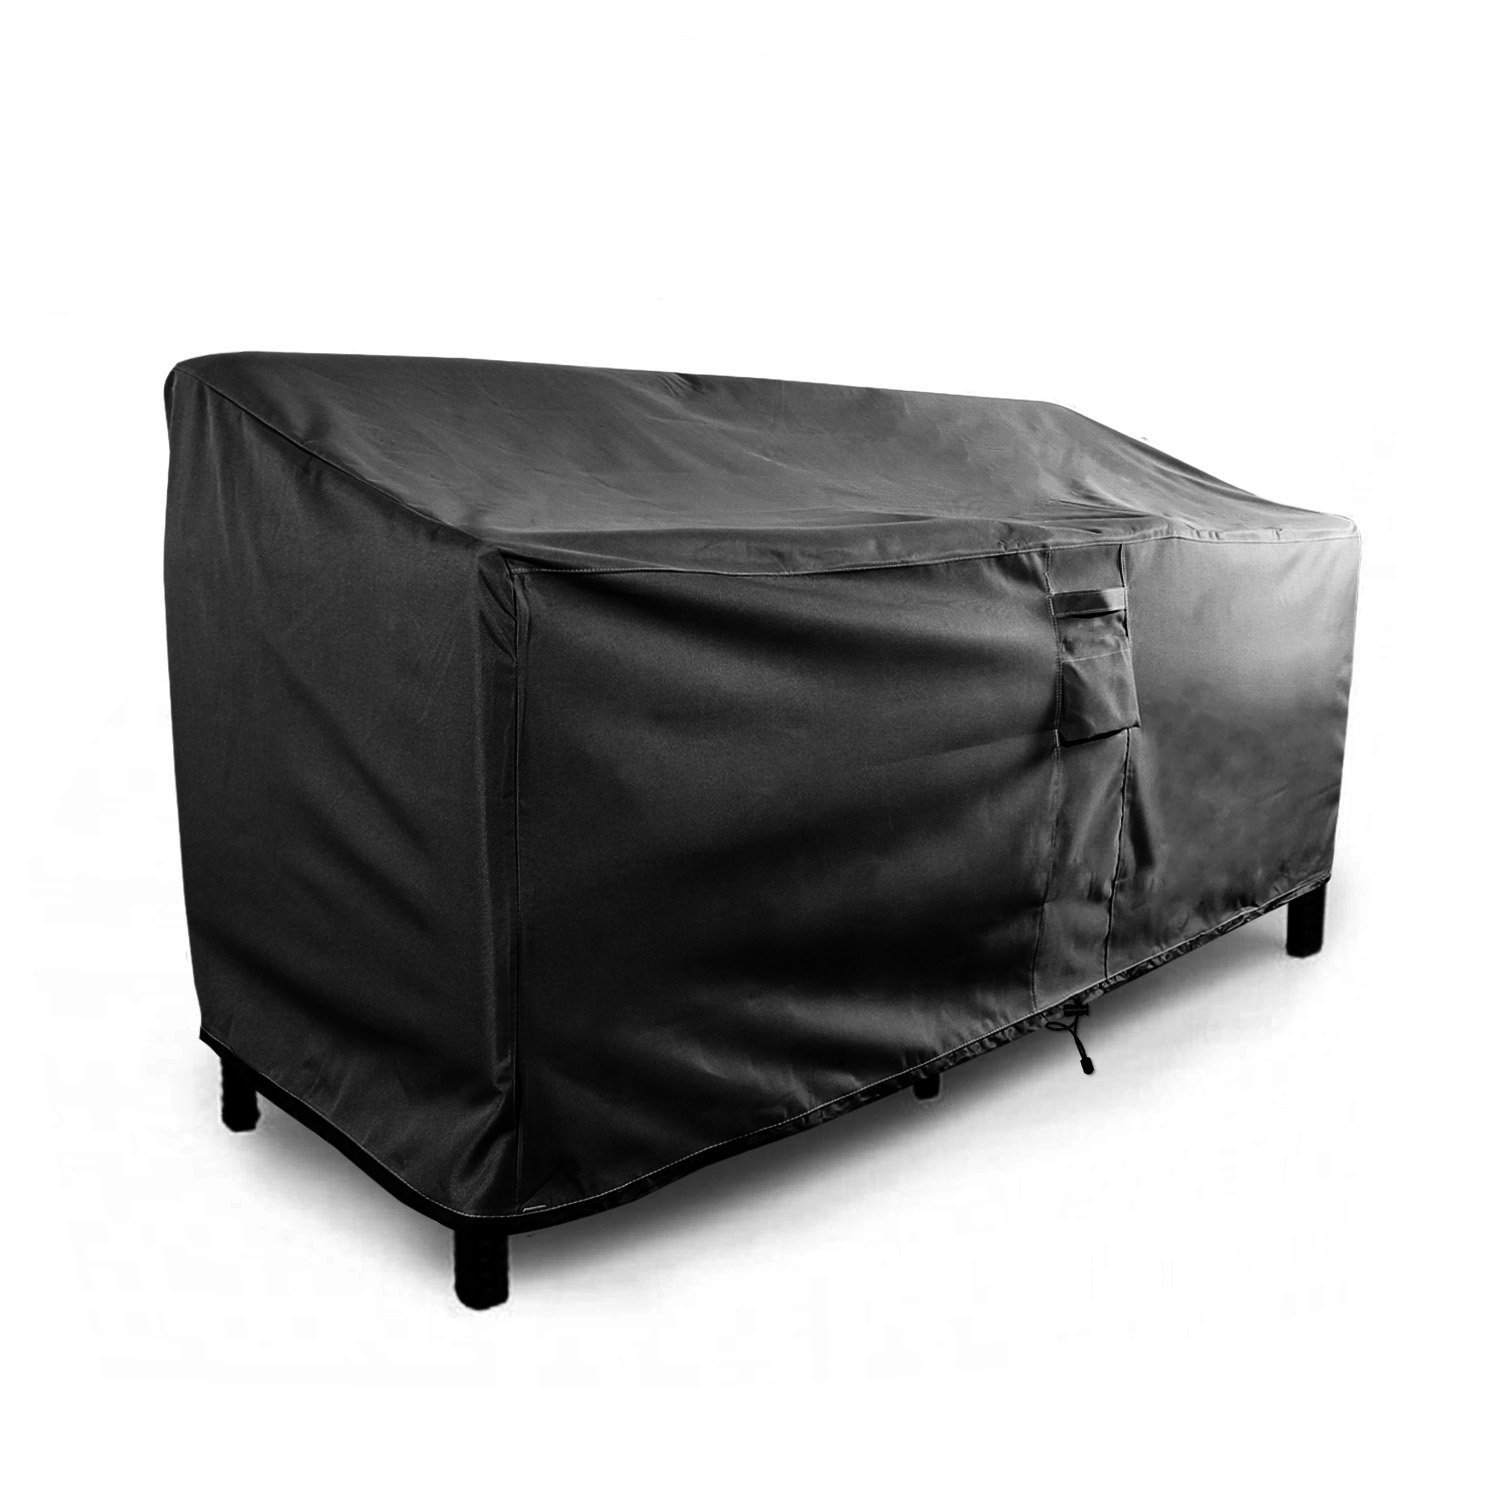 Outdoor Sofa Cover 88" x 32" x 33" Weatherproof Loveseat Outdoor Couch Patio Furniture Protector Large - Black - image 2 of 5